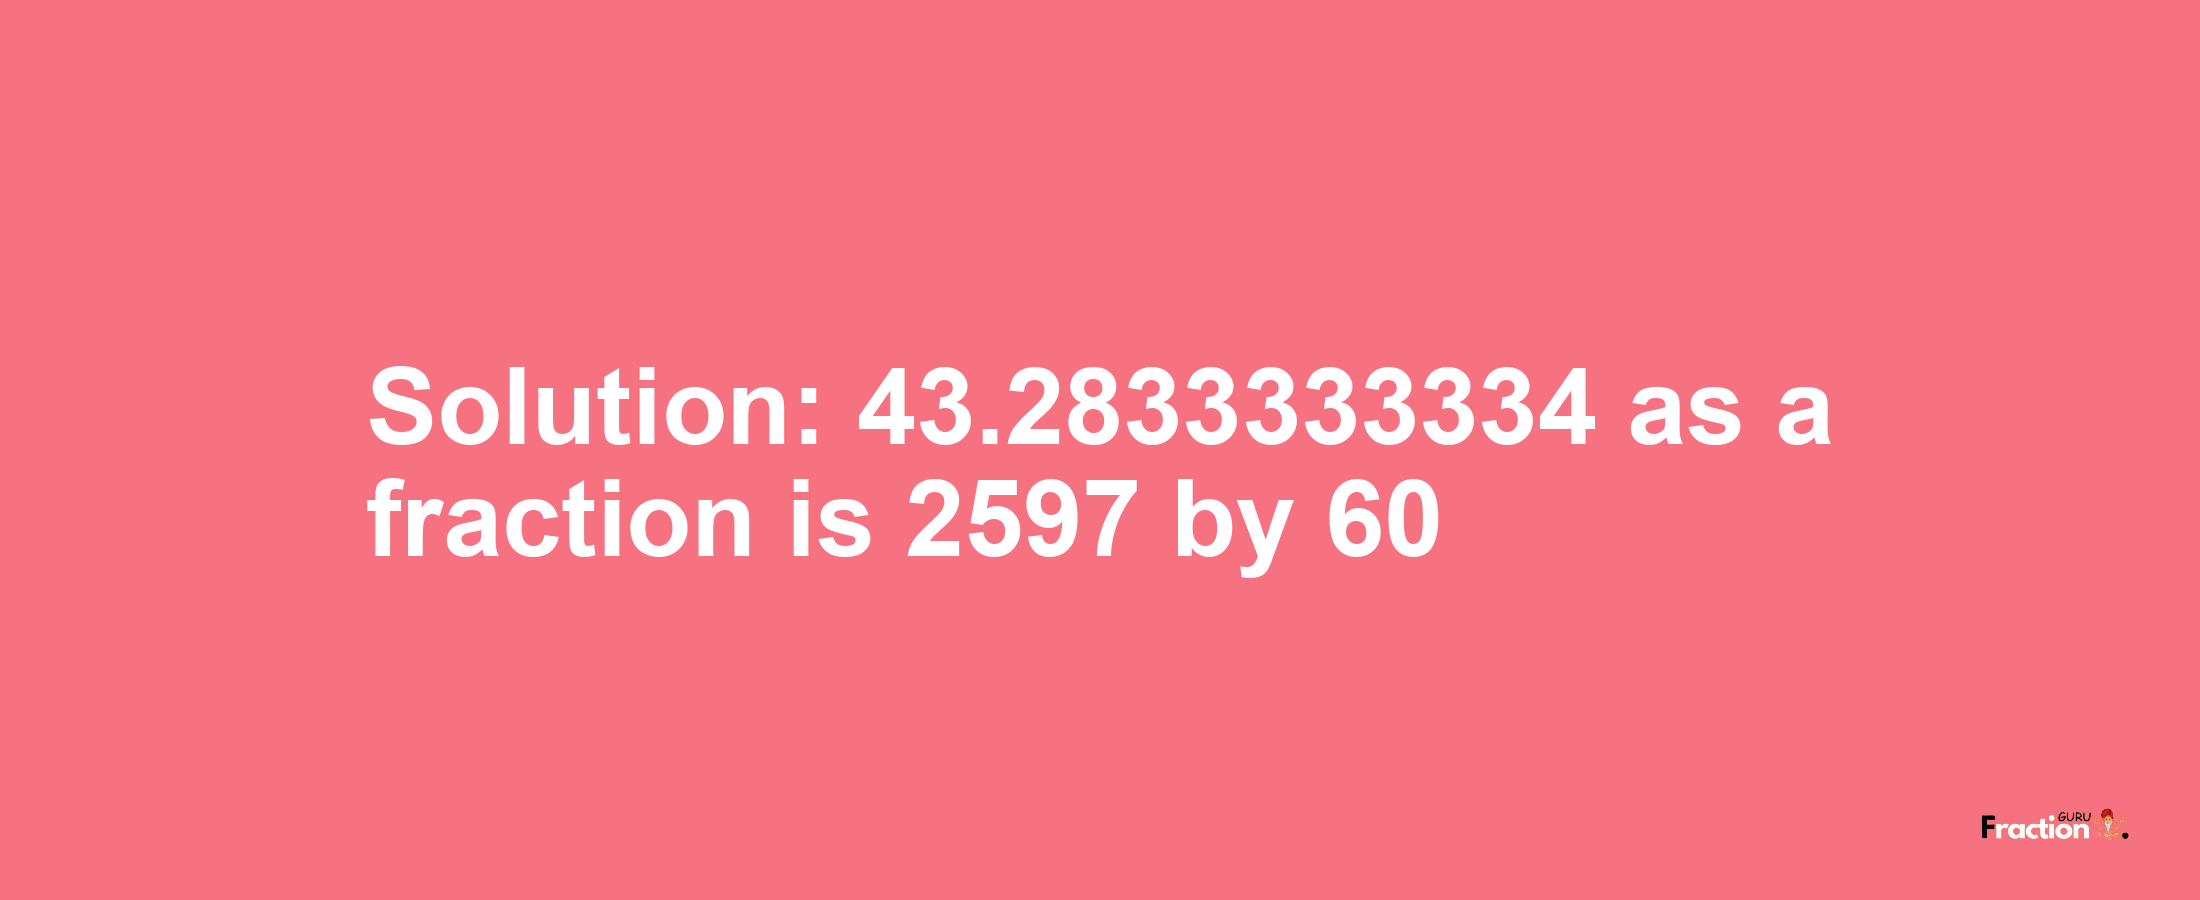 Solution:43.2833333334 as a fraction is 2597/60